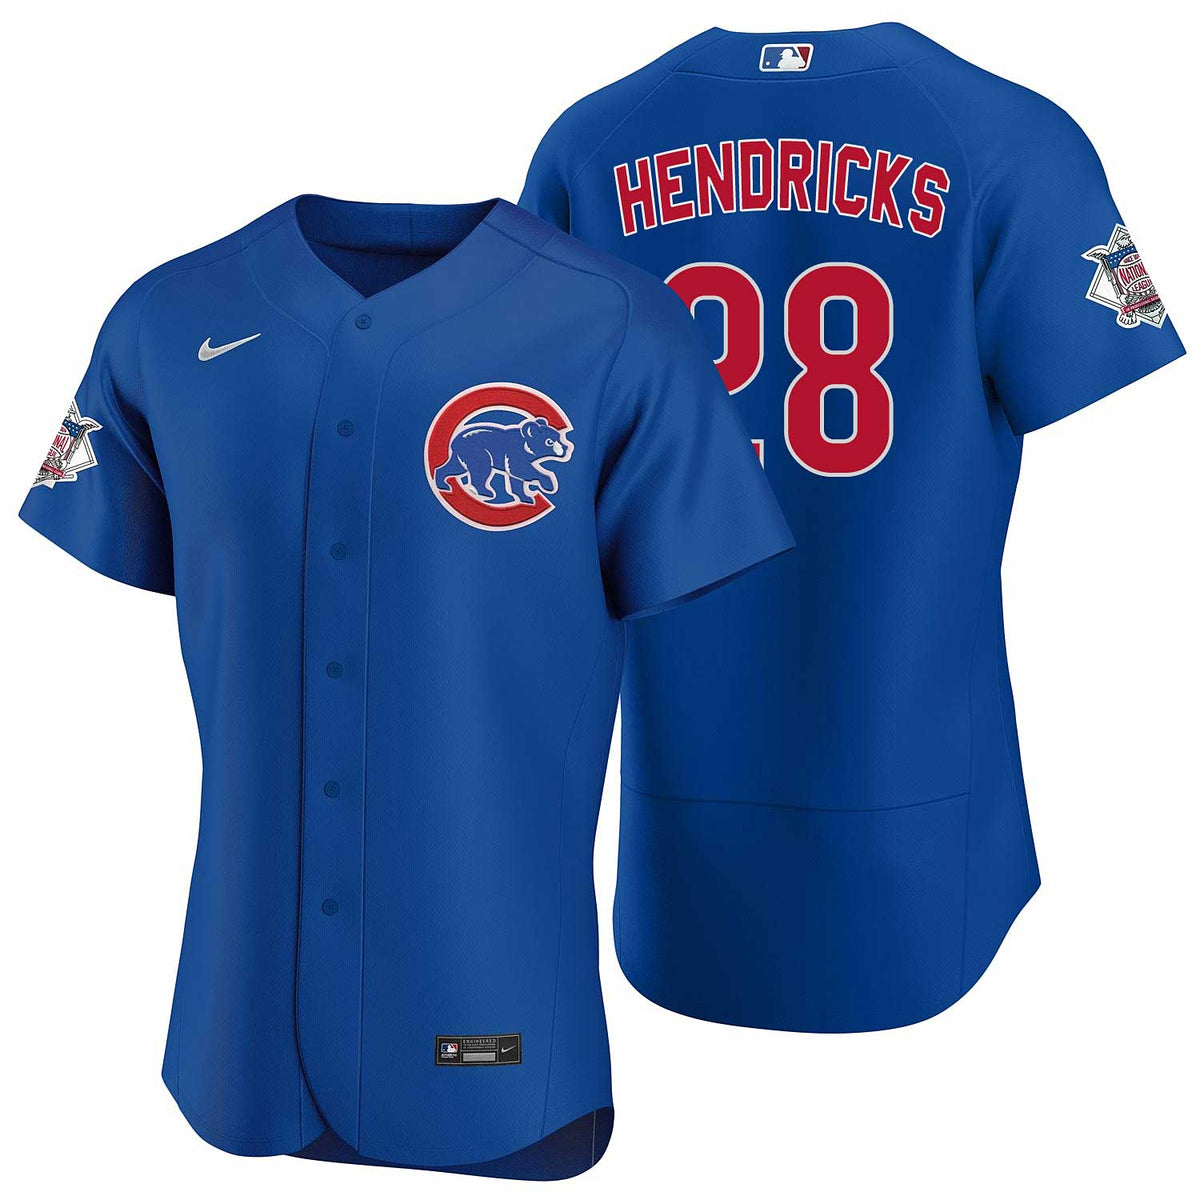 Cubs Authentics: Kyle Hendricks Game-Used Jersey - Features